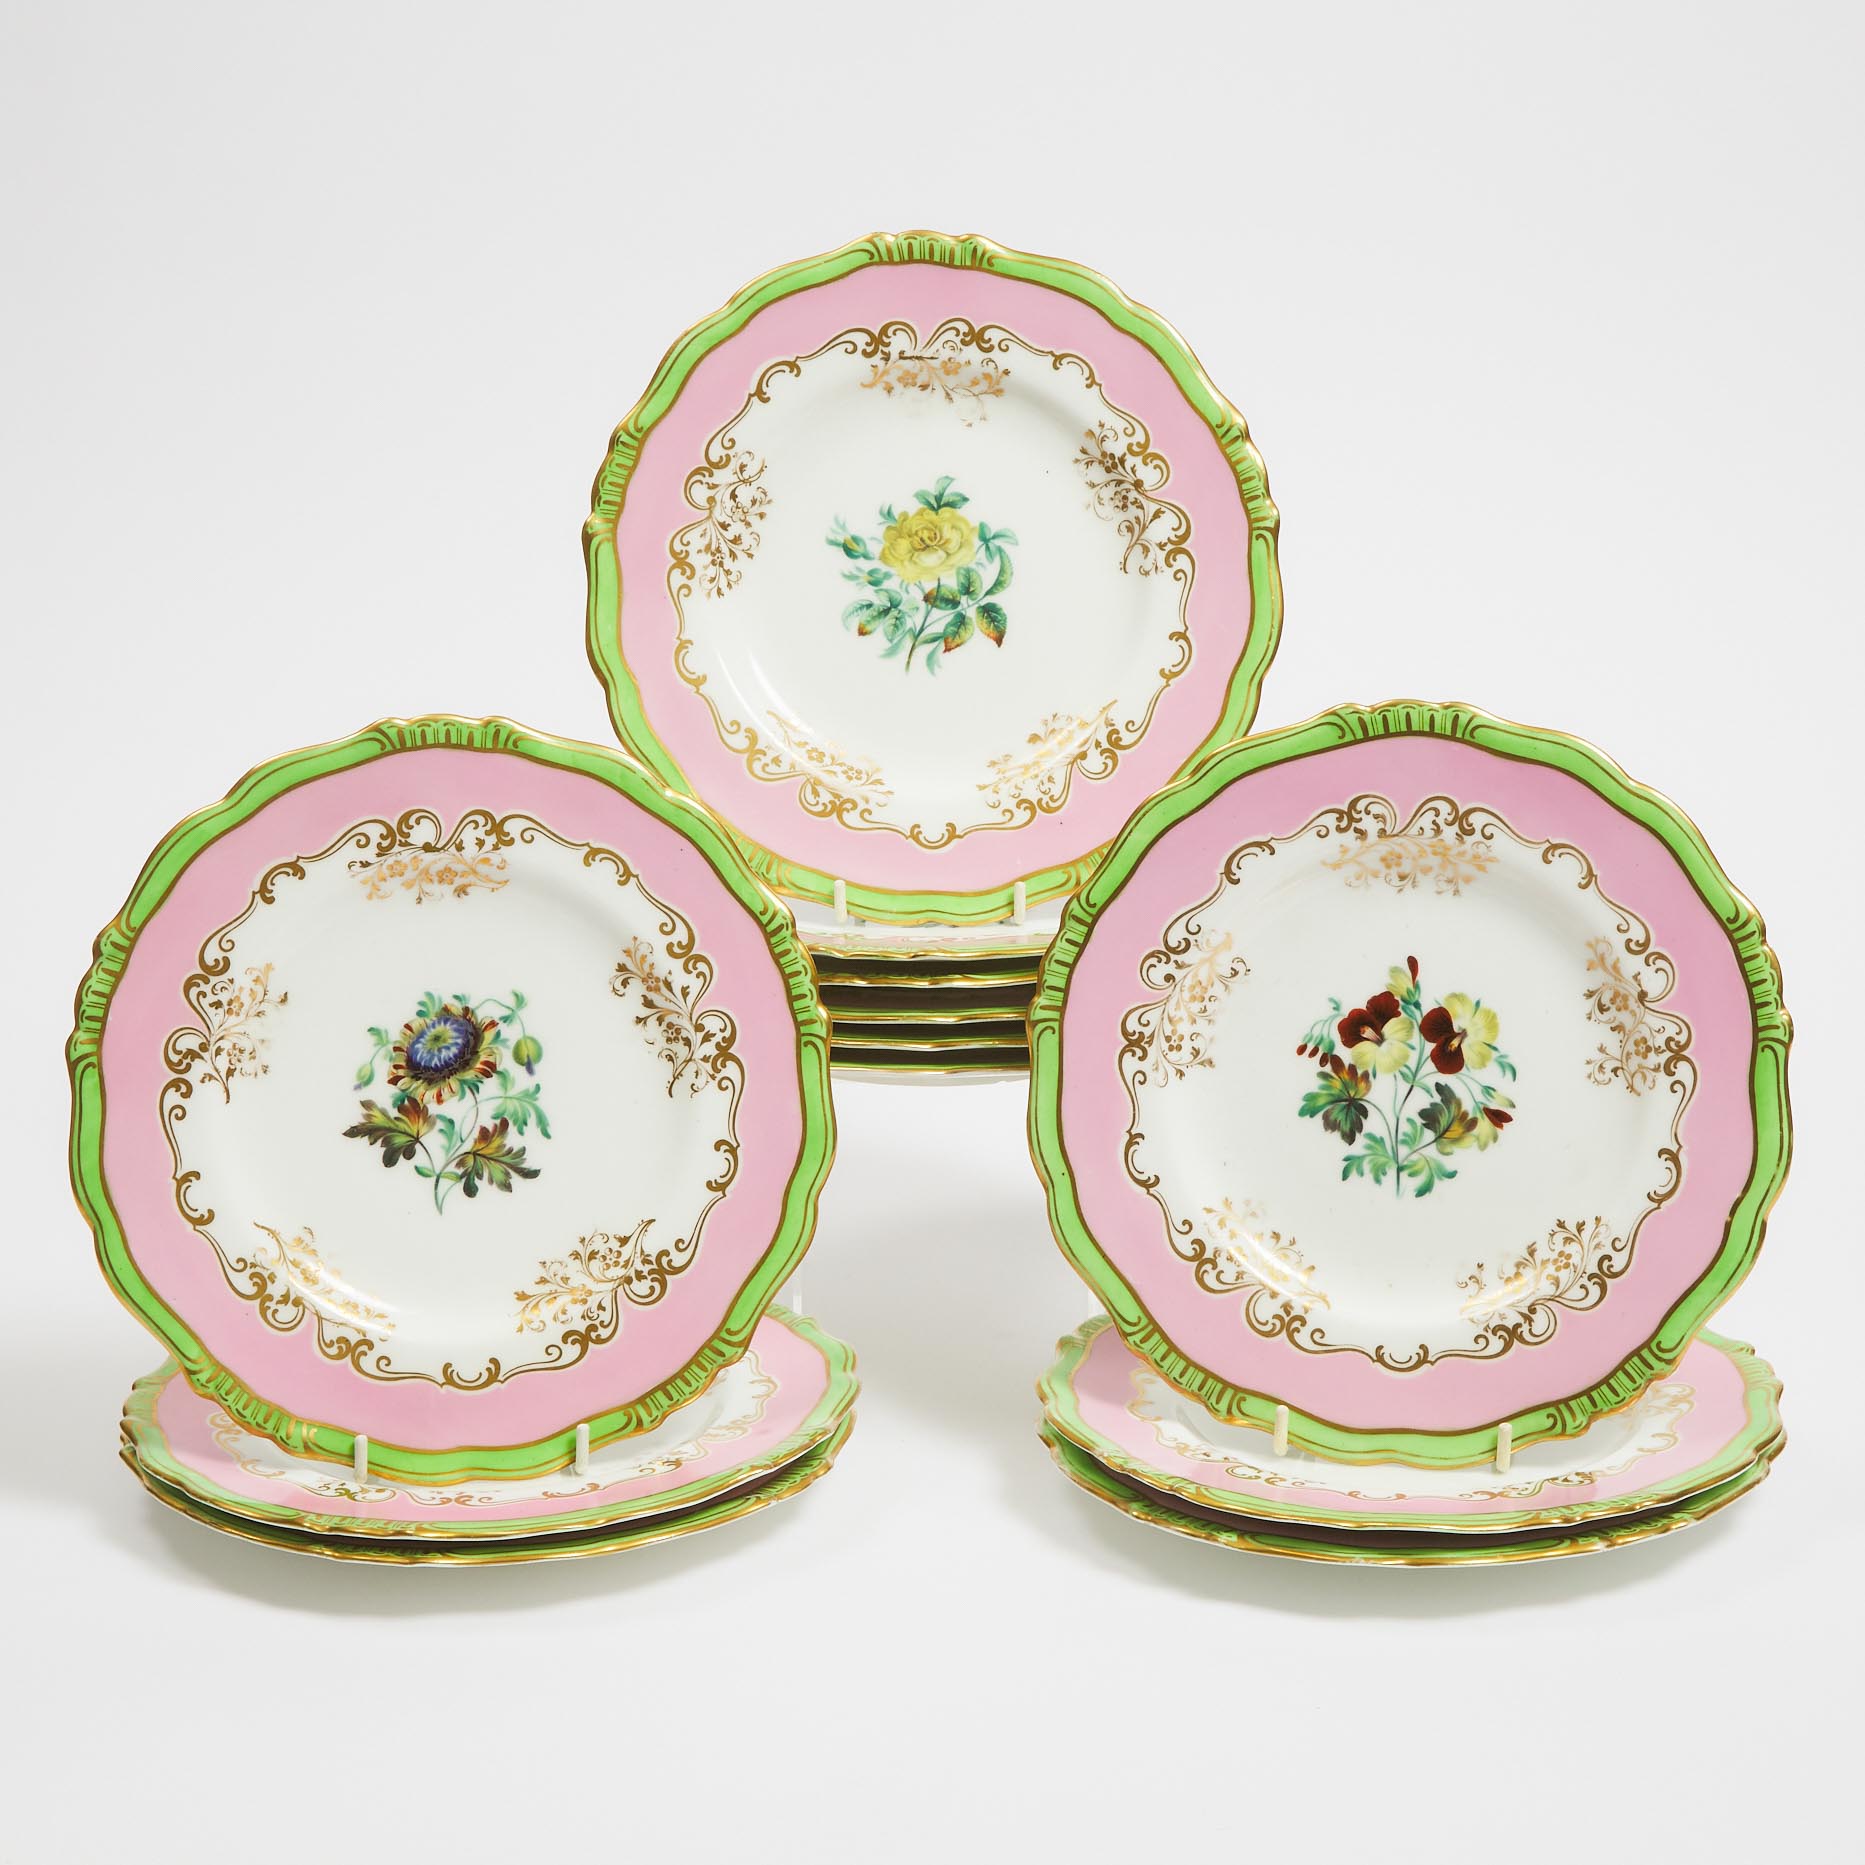 Set of Twelve Grainger's Worcester Pink, Green and Gilt Bordered Flower Painted Plates, mid-19th century